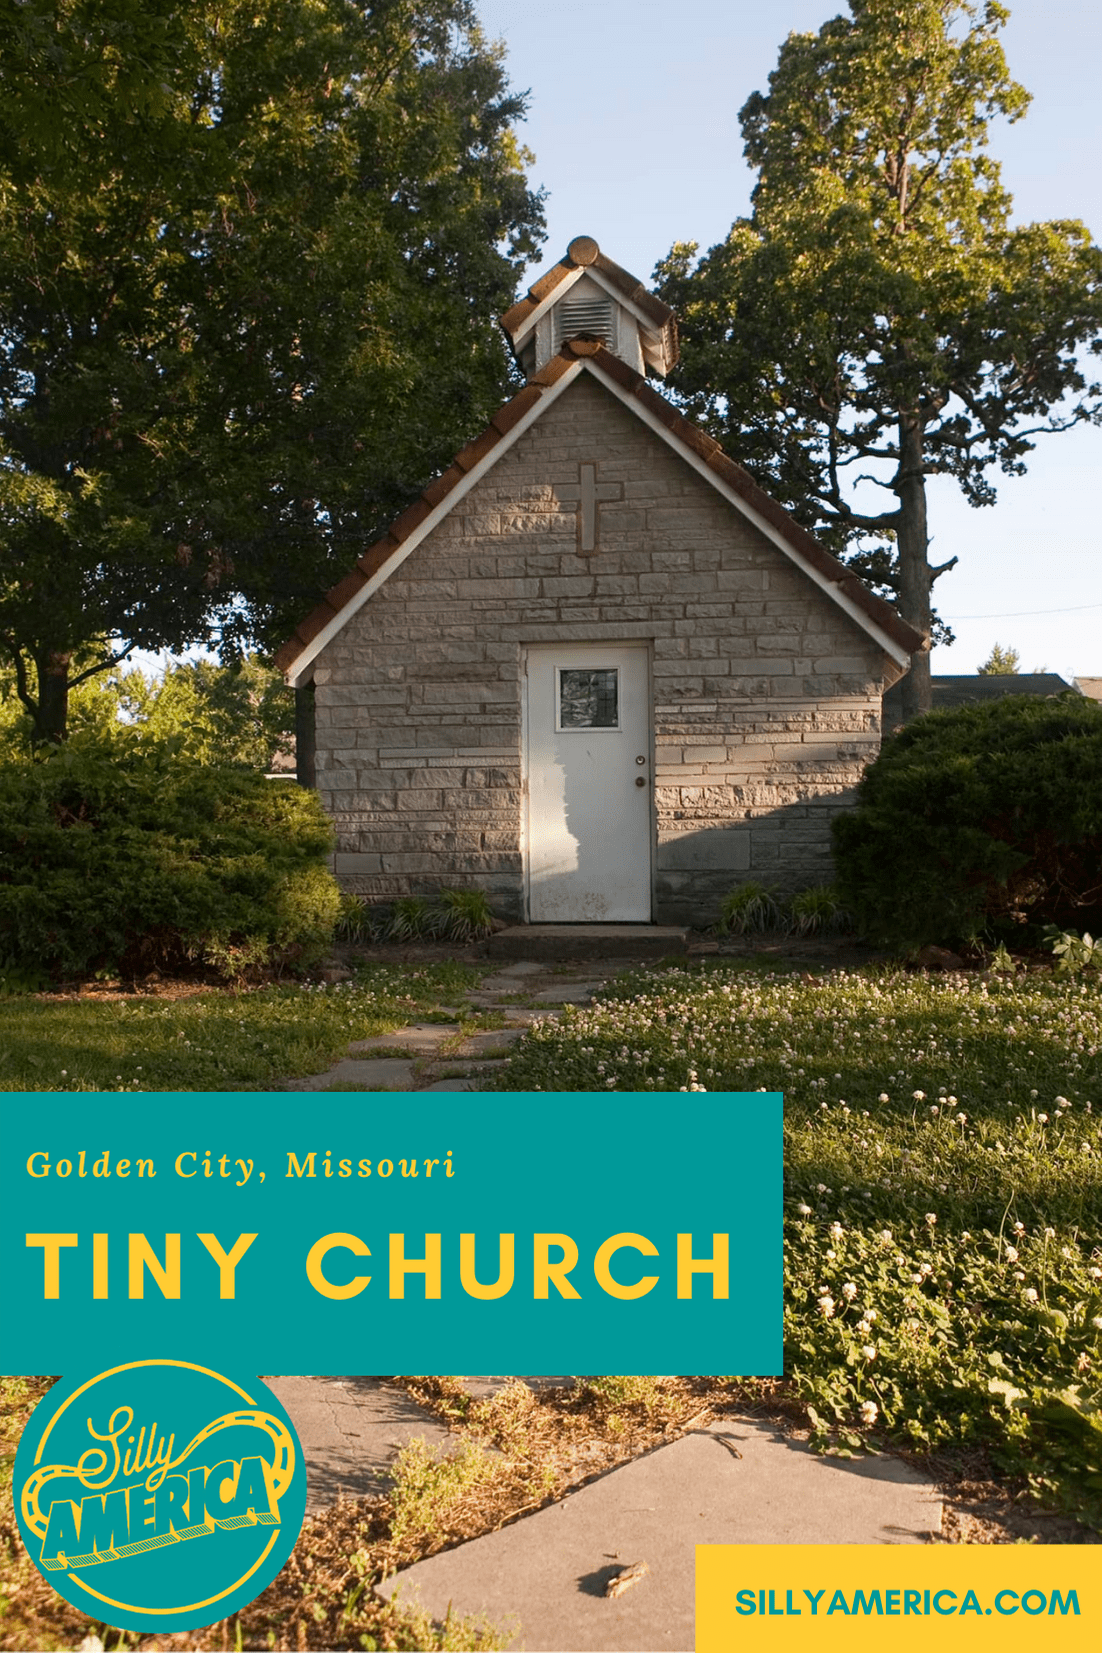 The Tiny Church in Golden City, Missouri can be found in the town's small park. It was build in the 1950s or 60s by a local boy scout troop. #MissouriRoadsideAttractions #MissouriRoadsideAttraction #RoadsideAttractions #RoadsideAttraction #RoadTrip #MissouriRoadTrip #MissouriRoadTripMap #PlacestoVisitinMissouri #MissouriRoadTripIdeas #MissouriTravelRoadTrip